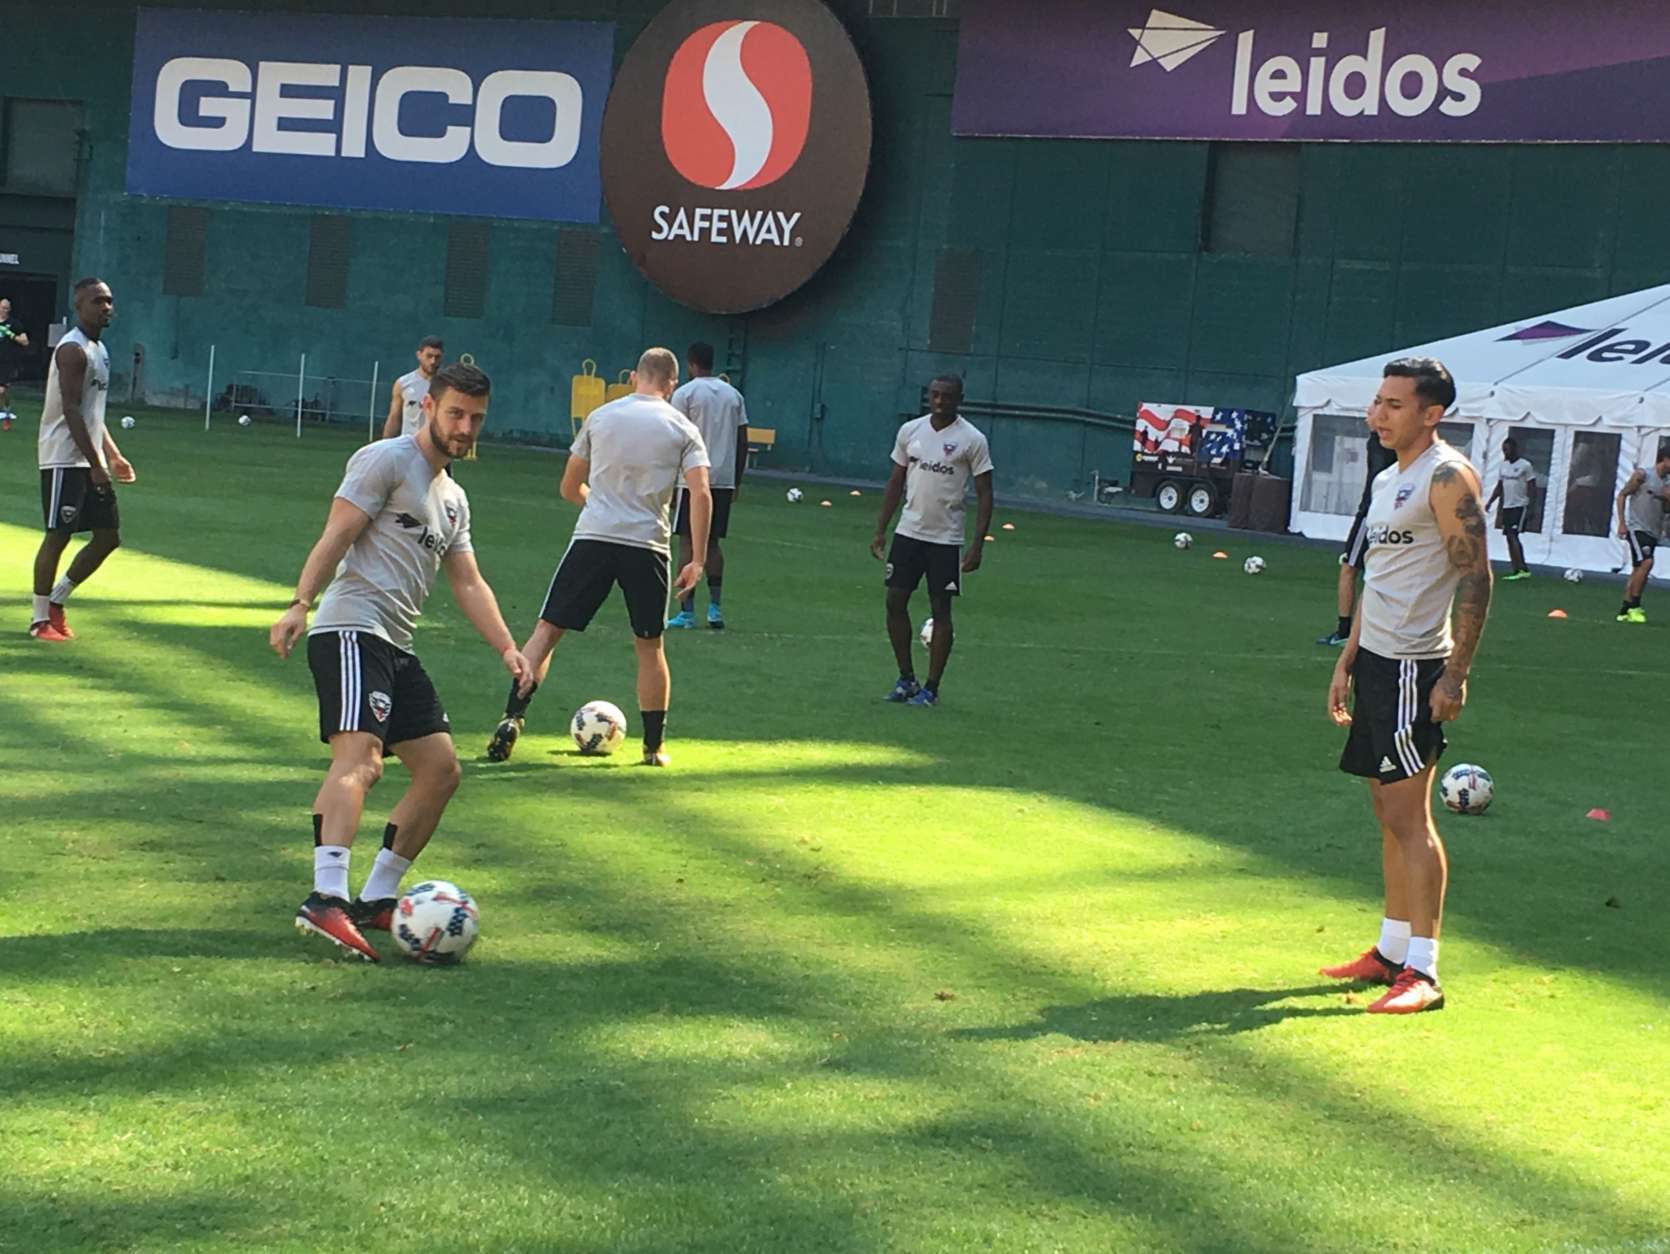 New additions to D.C. United's roster include Paul Arriola (left) and Bruno Miranda (right). (WTOP/Dave Johnson)